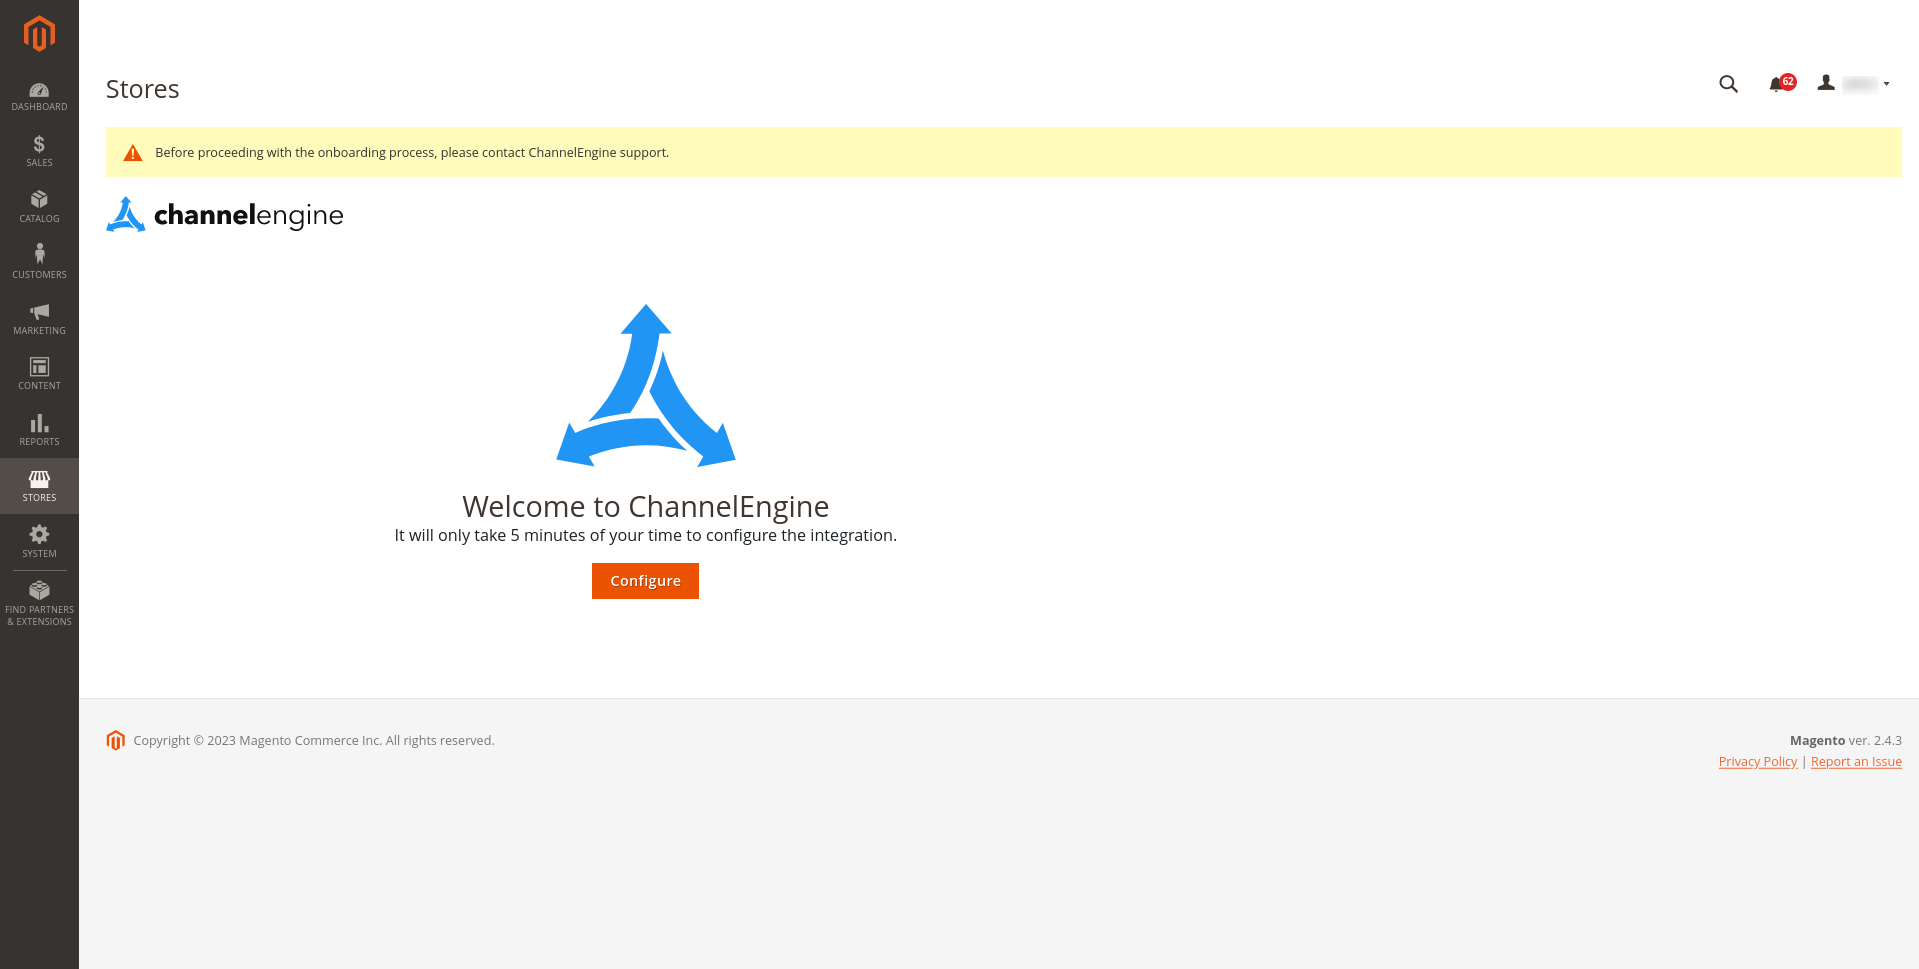 Welcome to ChannelEngine page